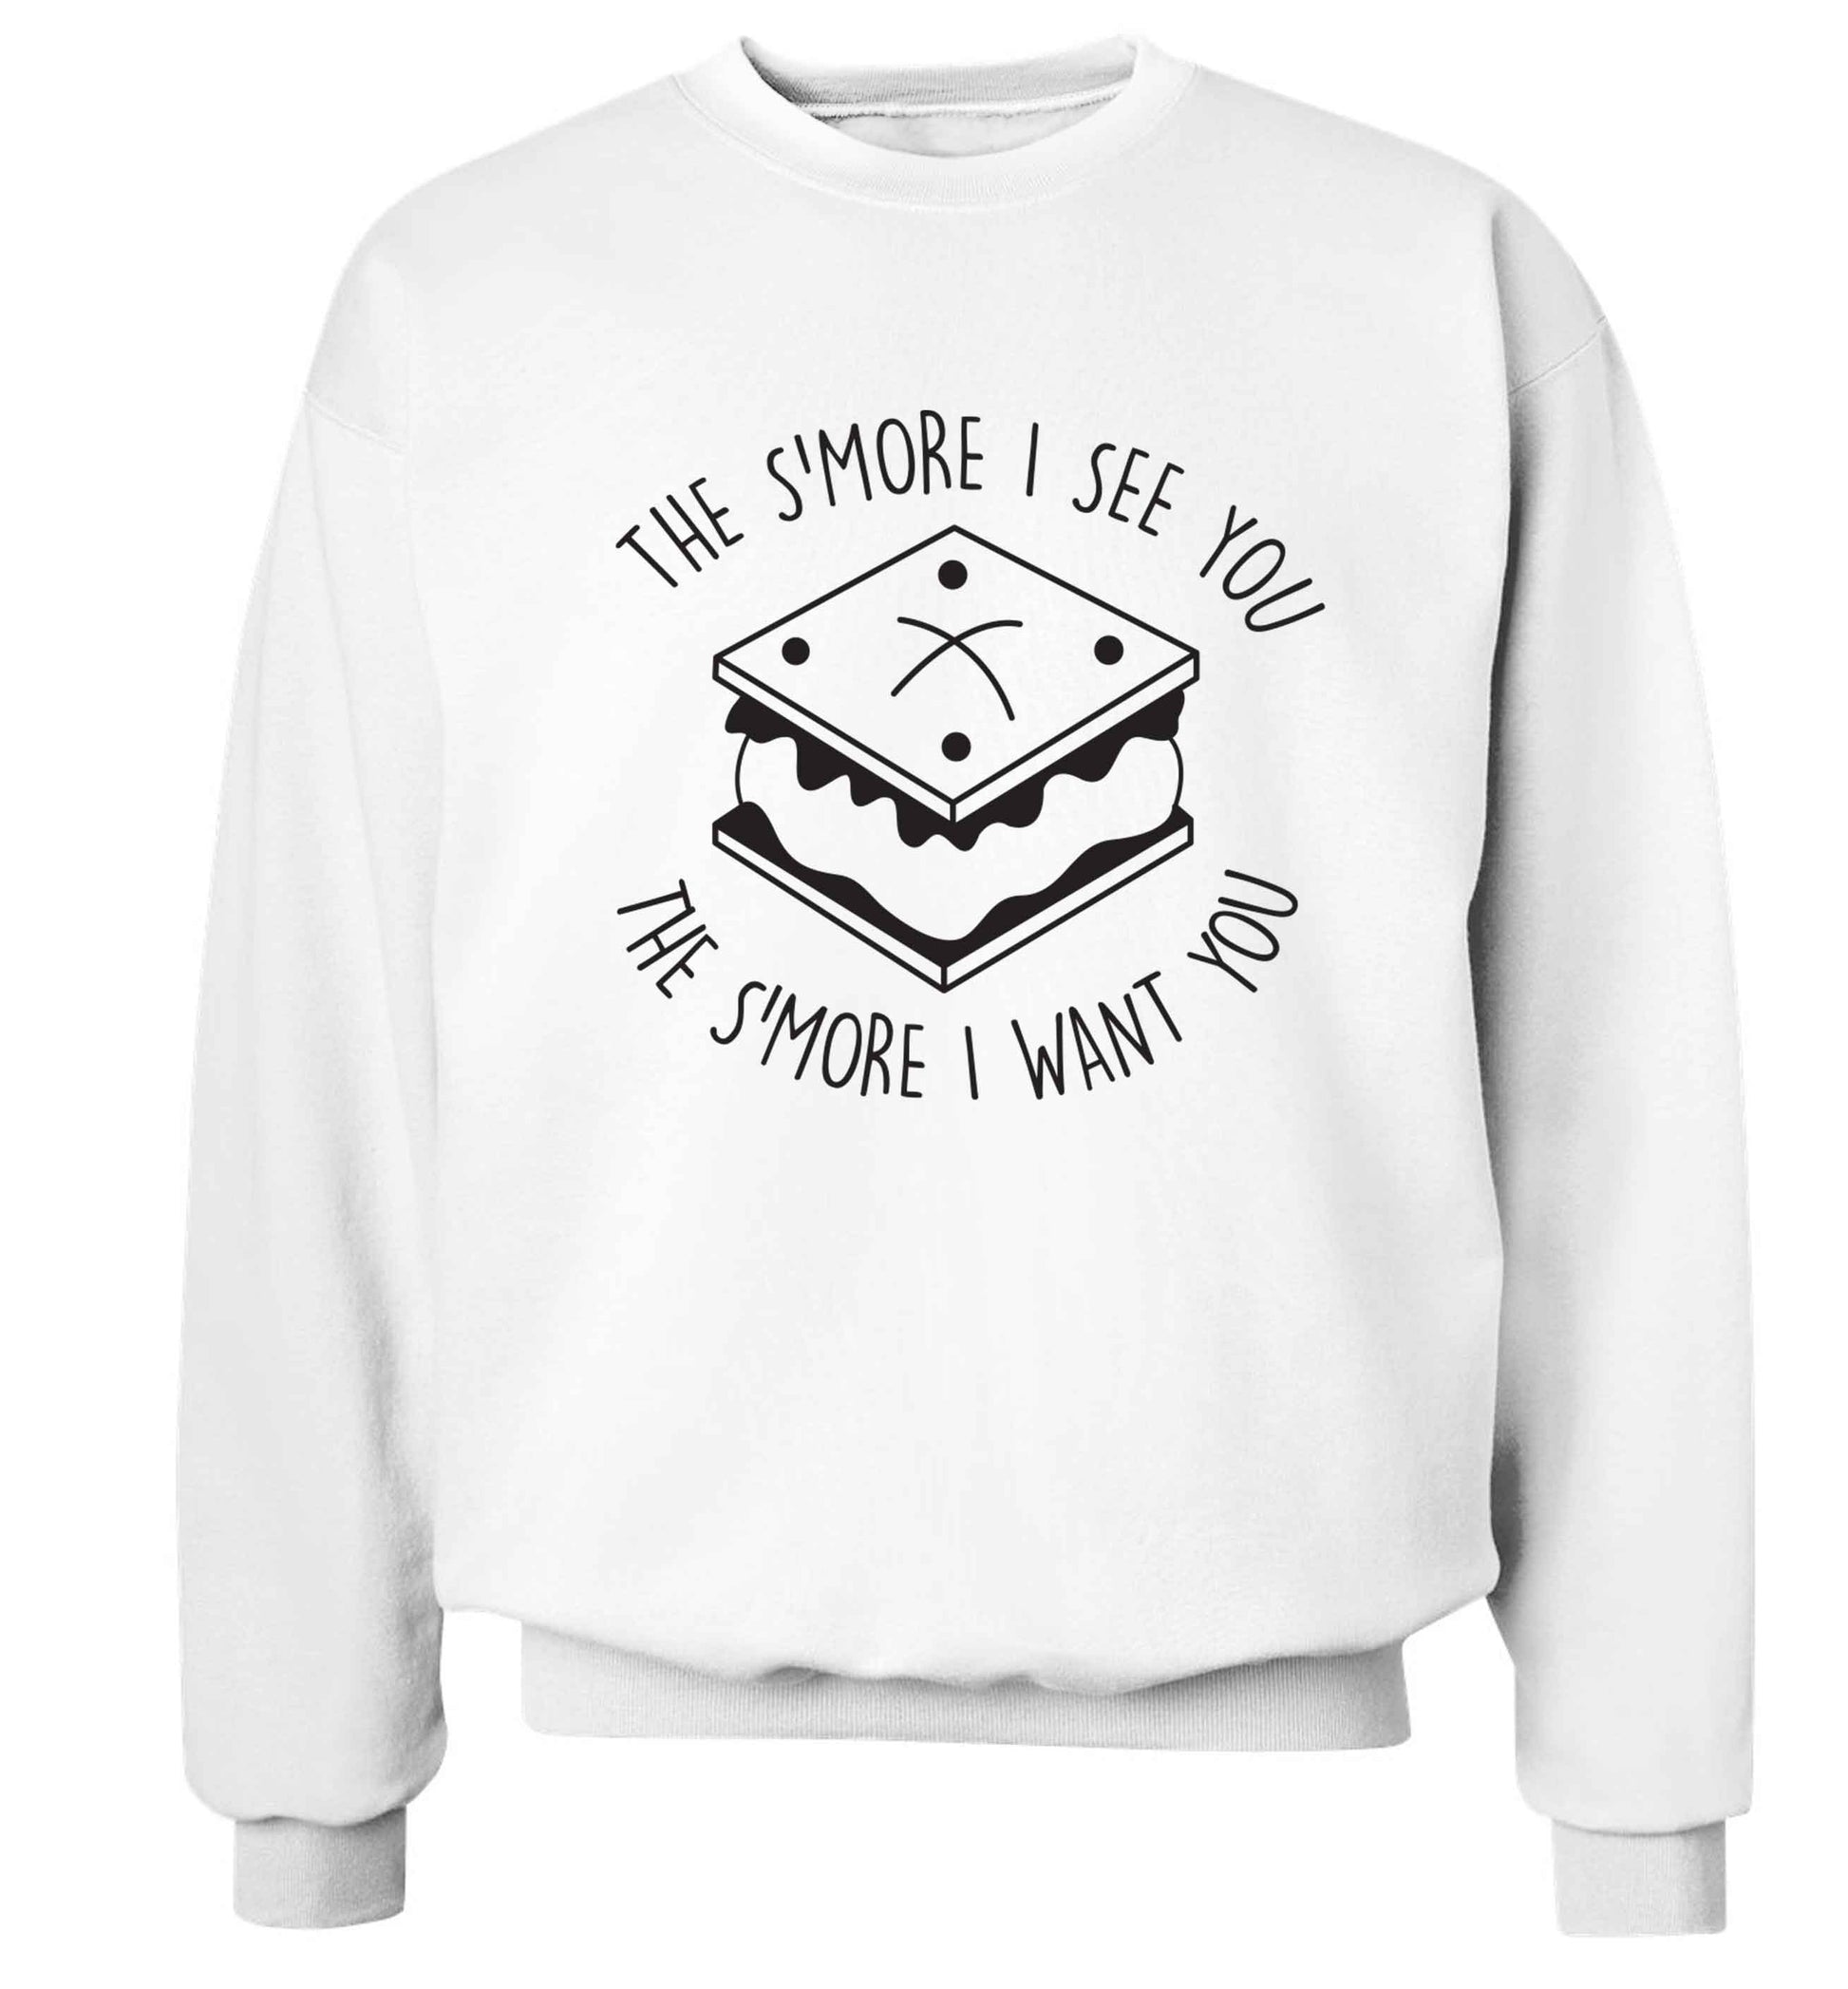 The s'more I see you the s'more I want you Adult's unisex white Sweater 2XL